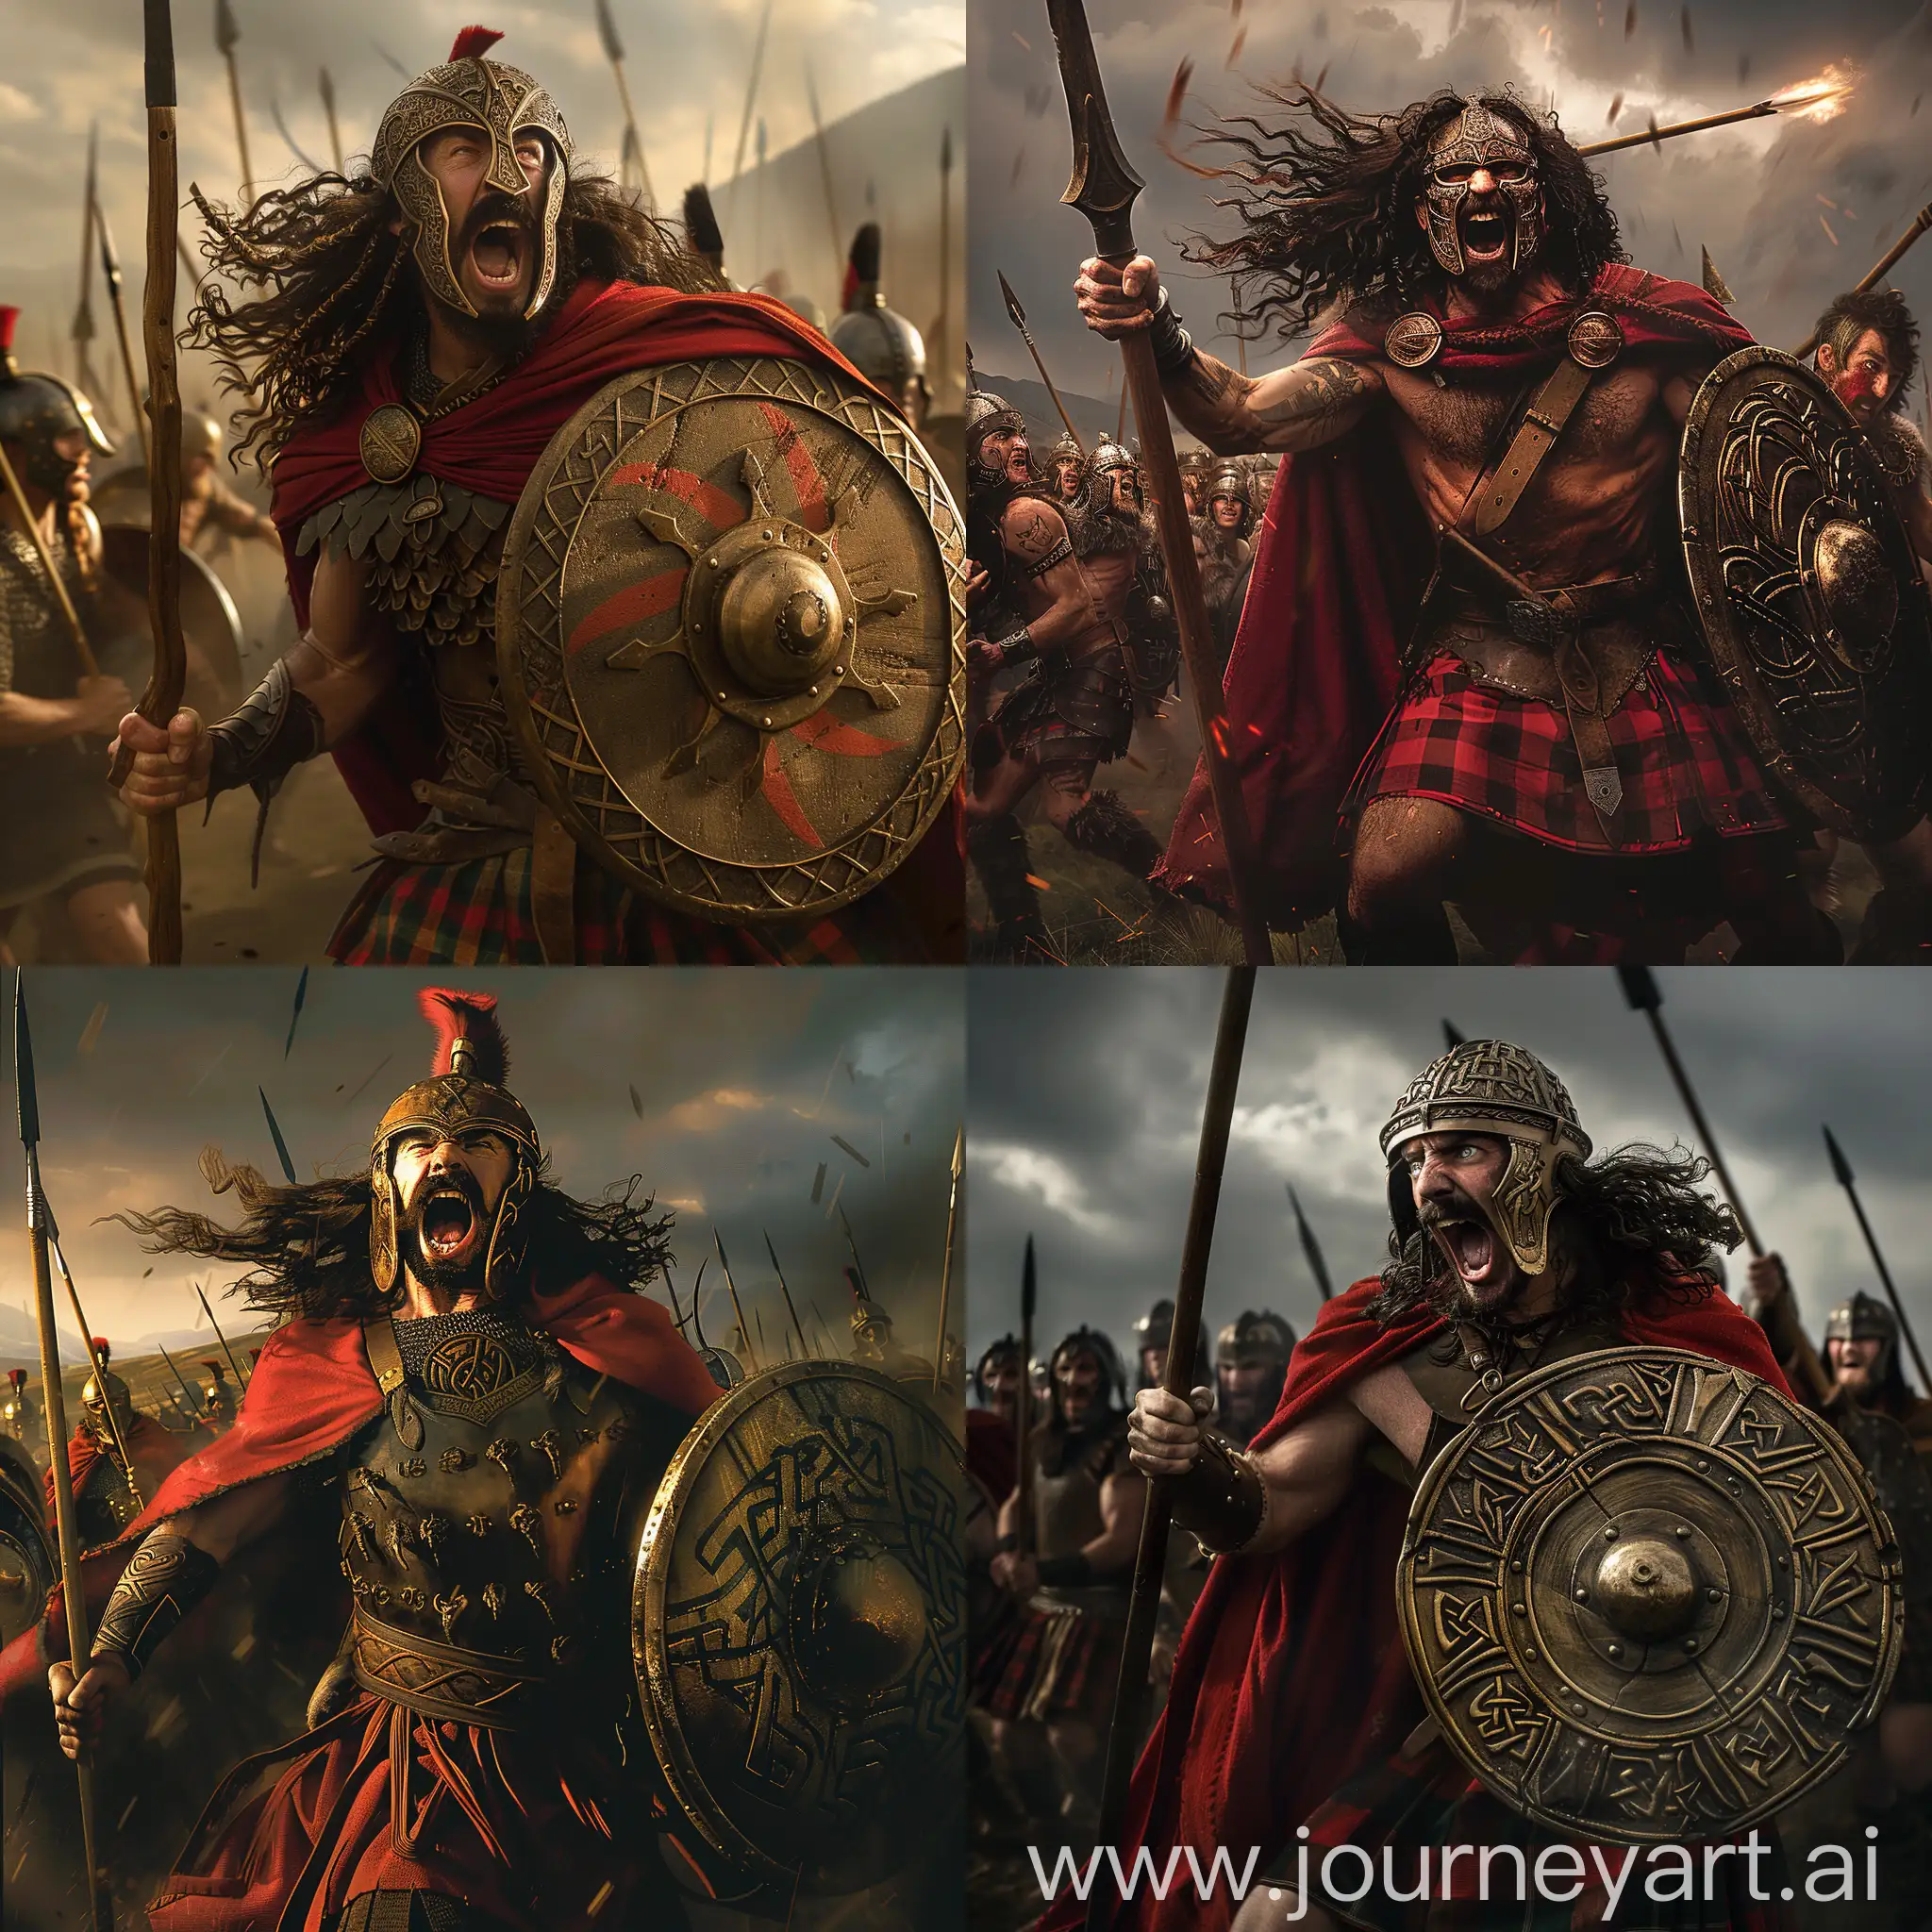 Celtic-Chieftain-Caratacus-Leading-Soldiers-in-Battle